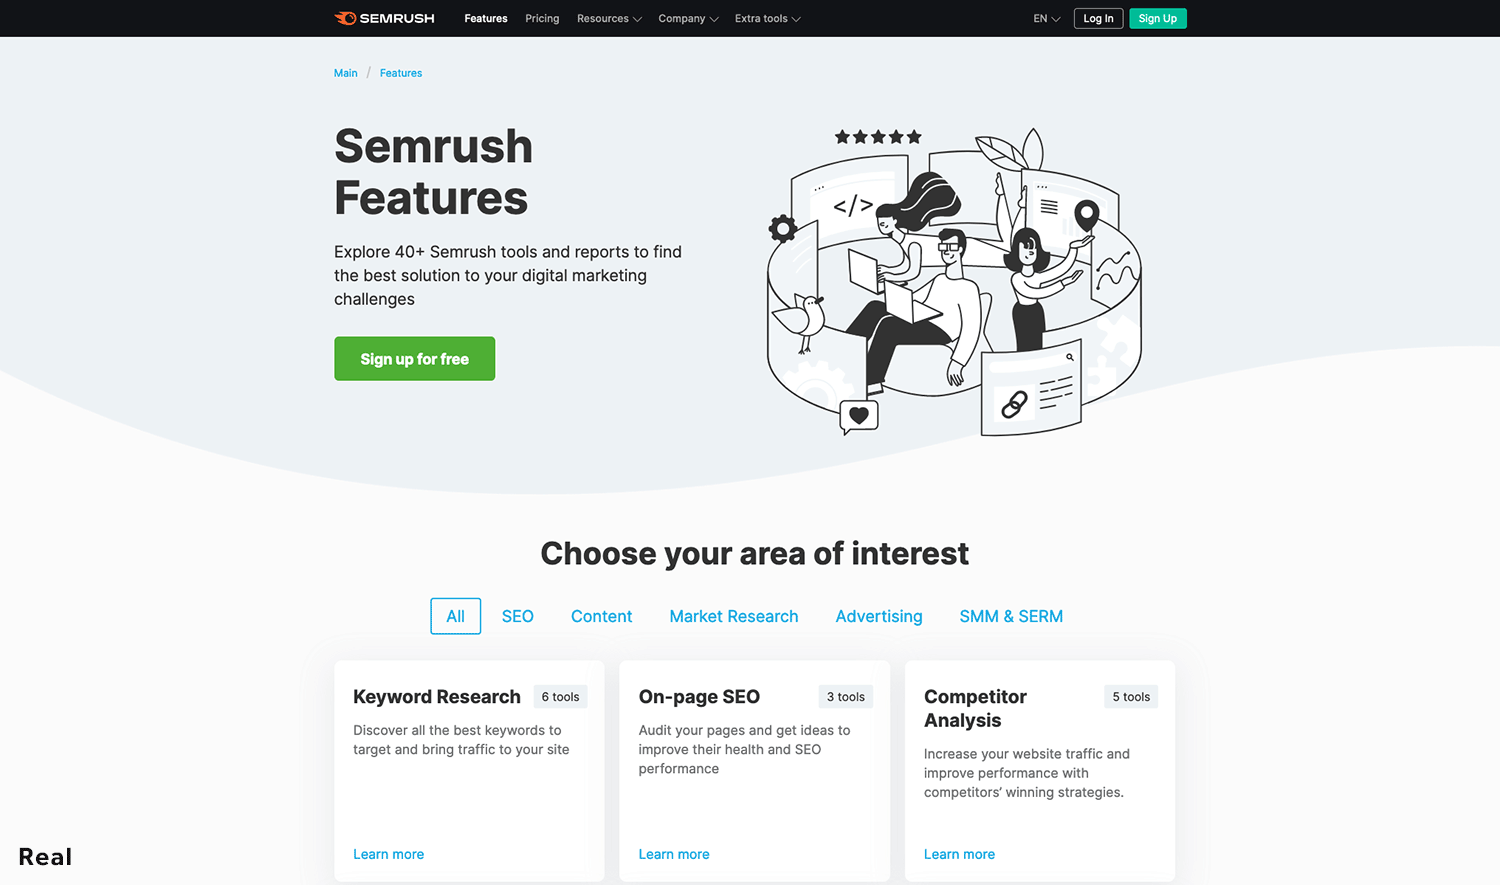 How Semrush would look less serious with Comic Sans MS as the font.